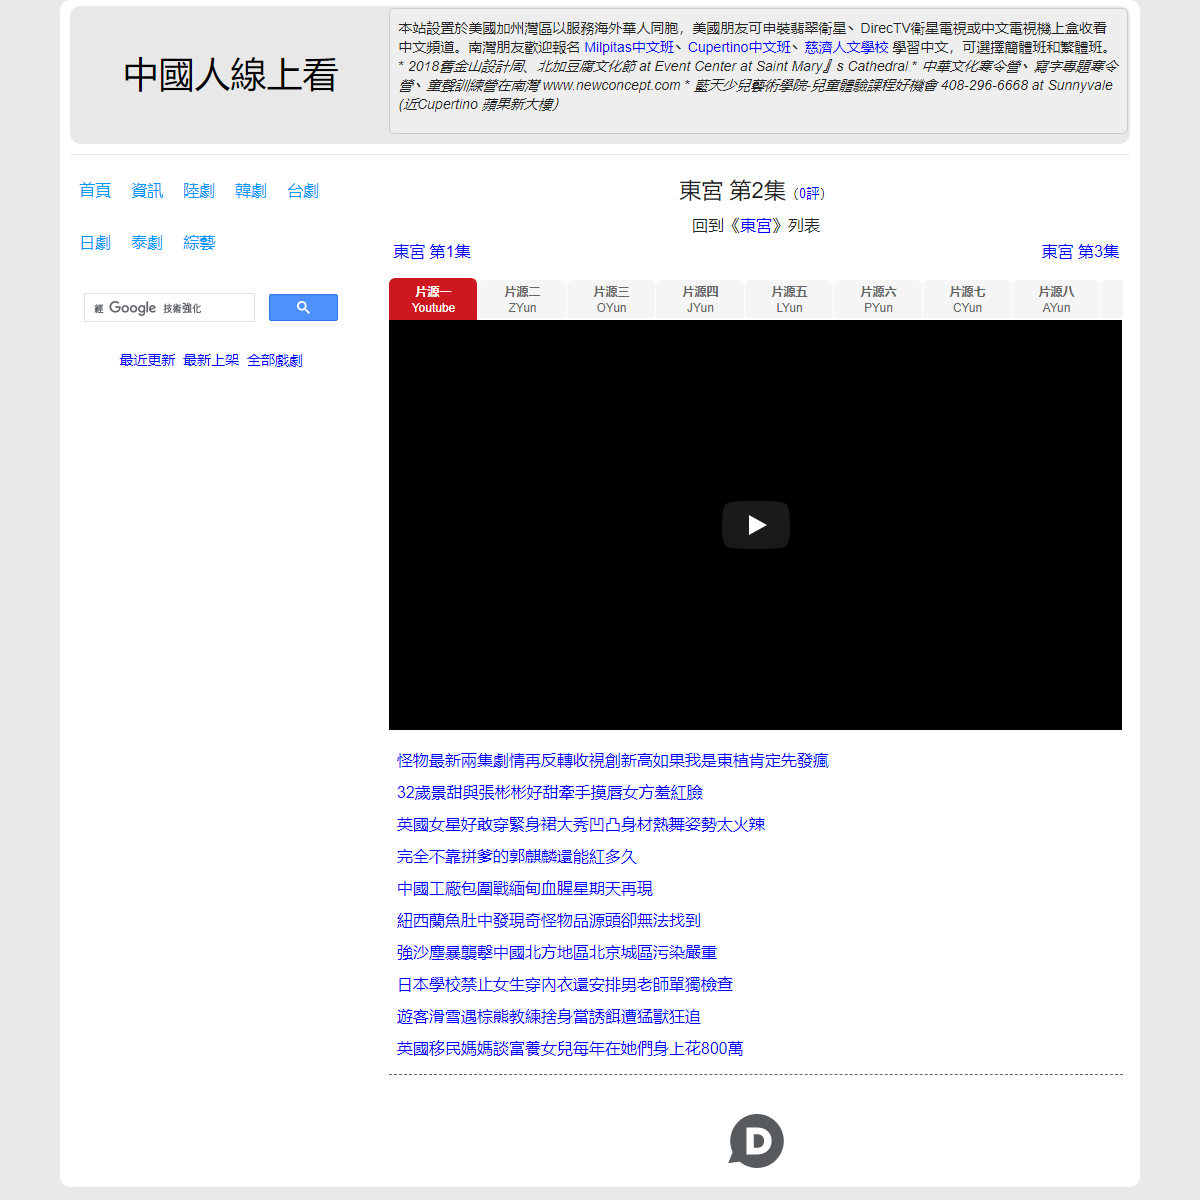 A complete backup of https://chinaq.tv/cn190214b/2.html